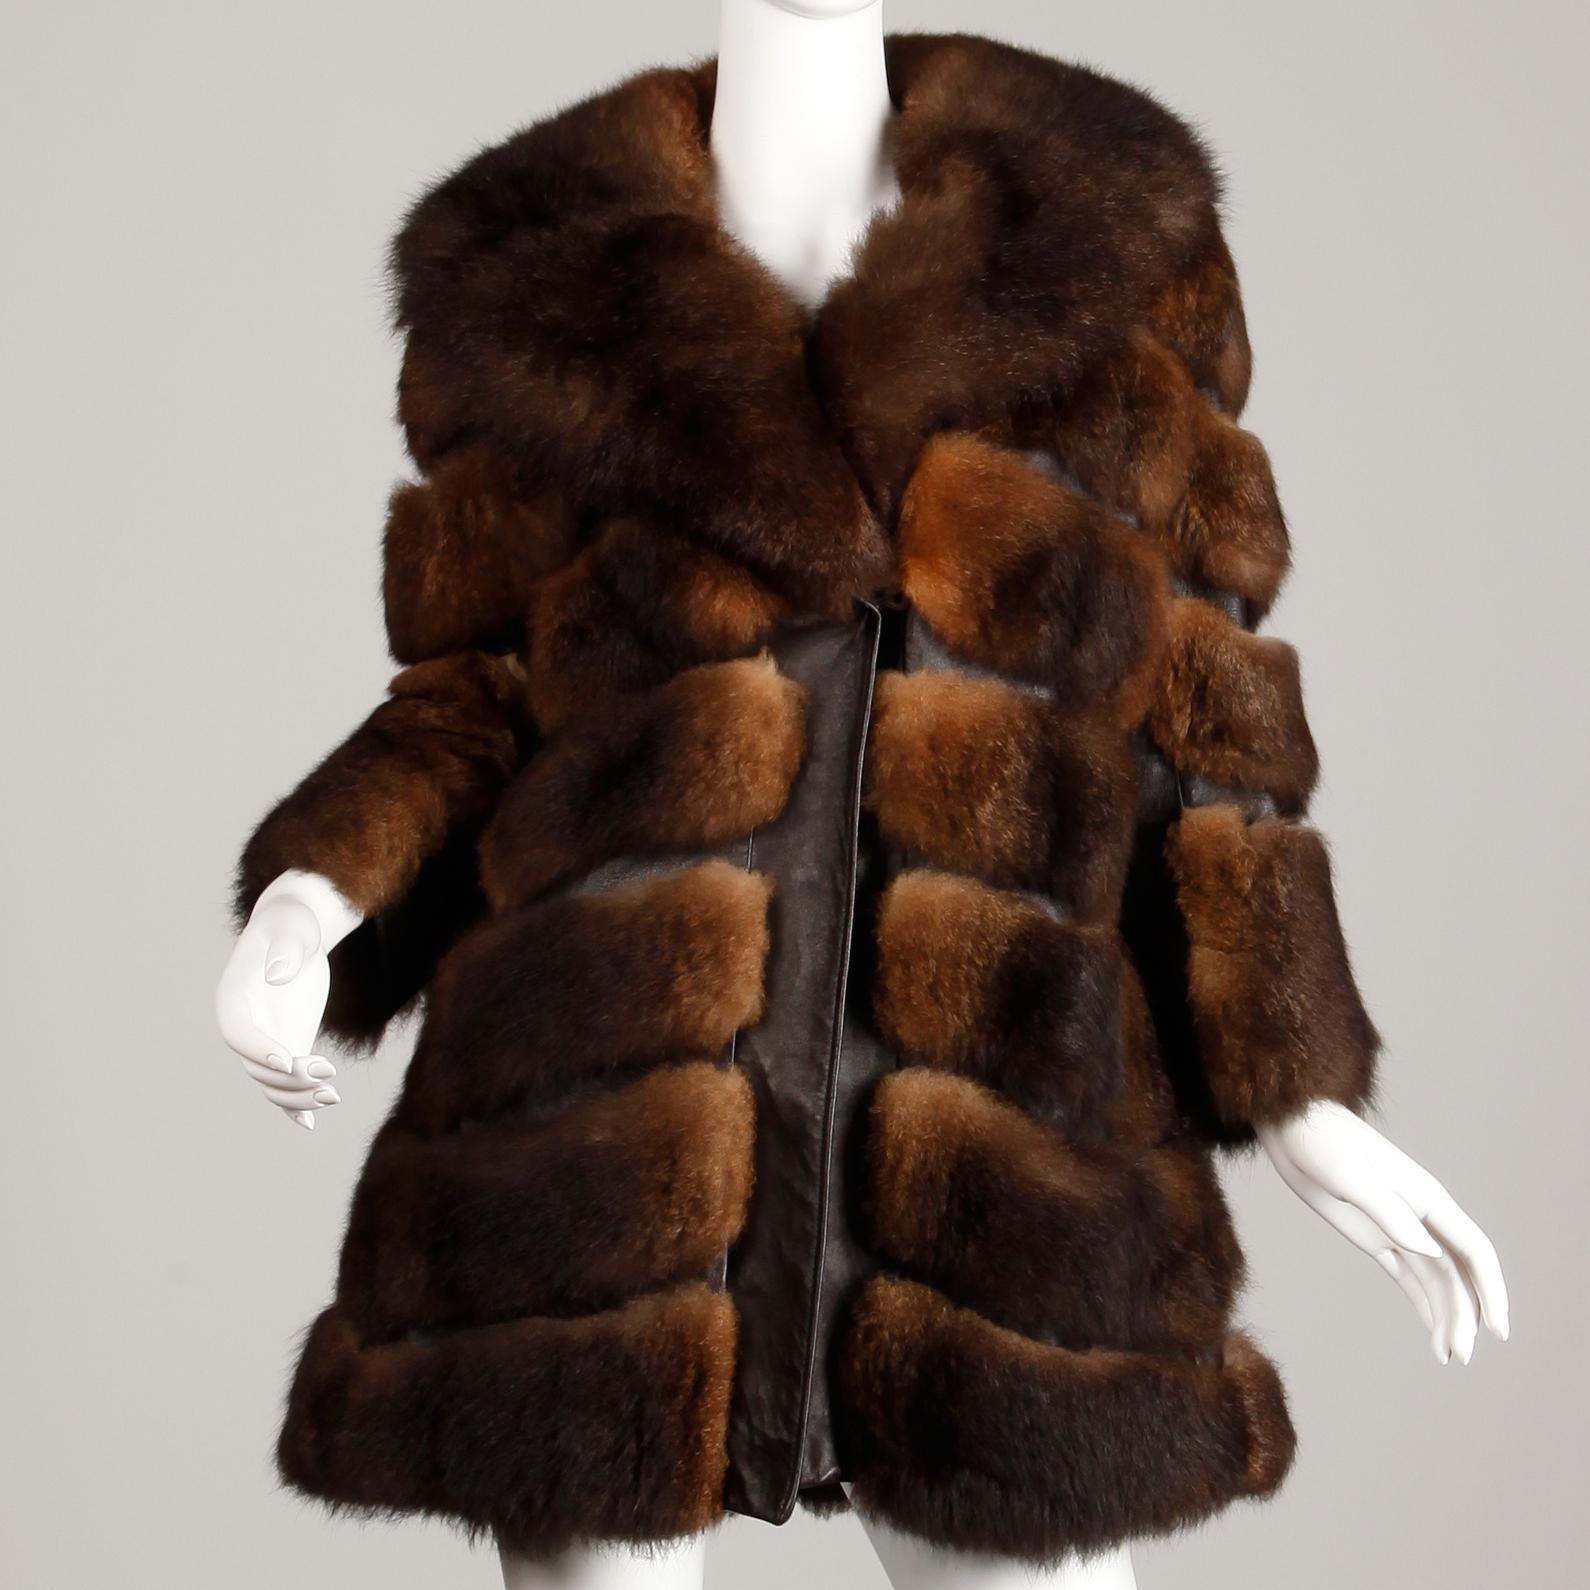 So soft and full! This 1970s vintage brown opossum fur coat is unbelievably soft. It features leather trim and a chevron design. Fully lined with front hook closure. Hidden side pockets. Fits like a modern size small-medium. The bust measures 41